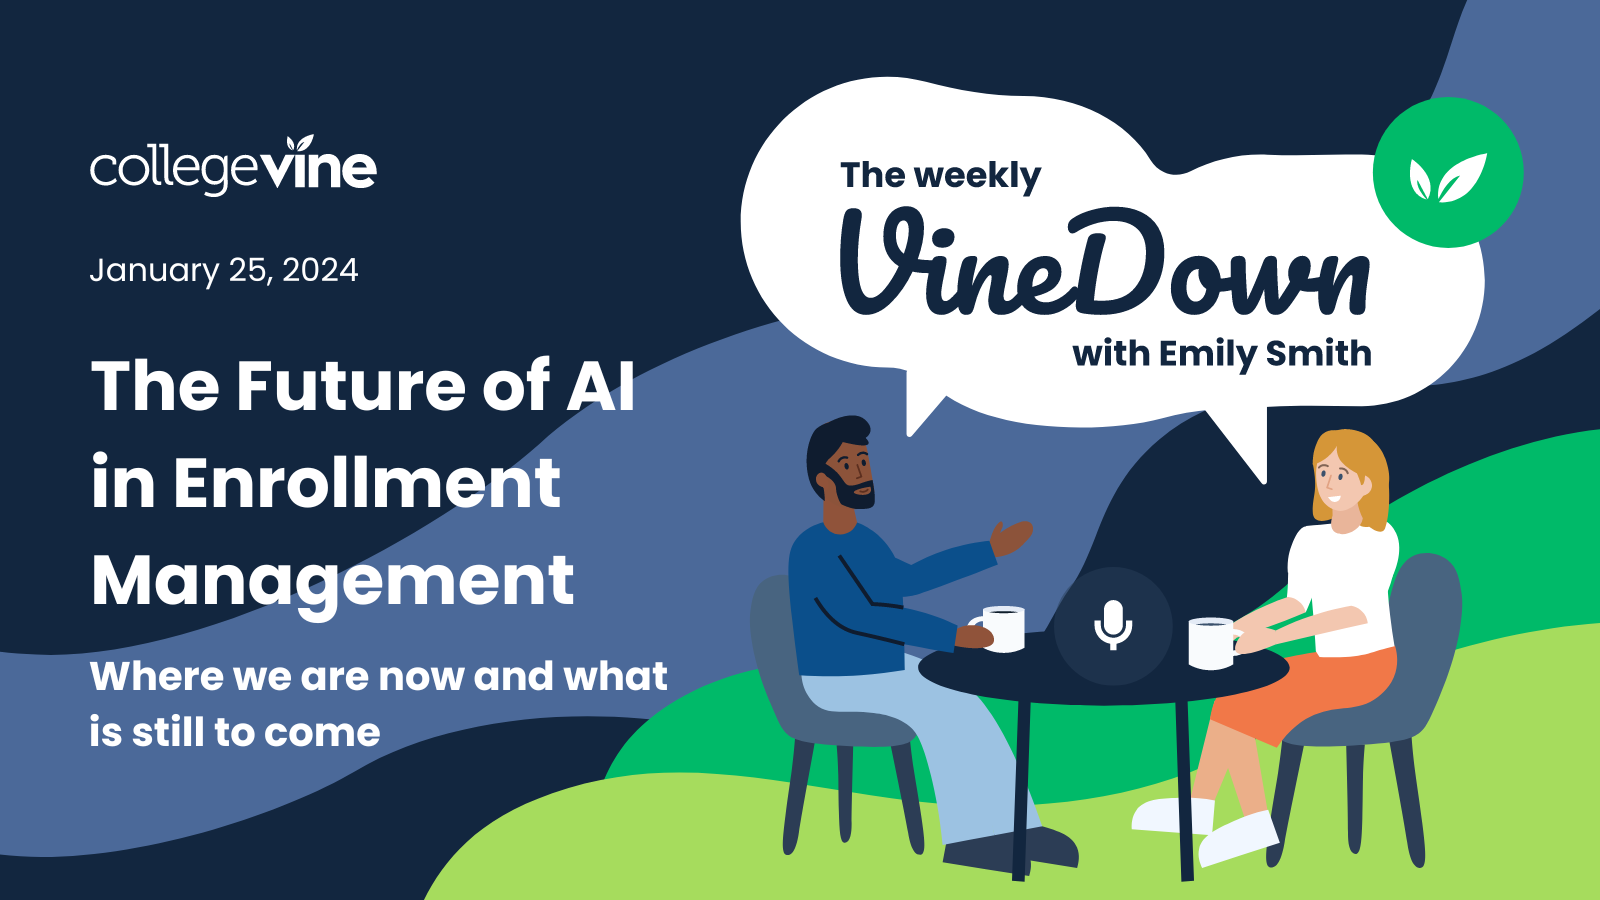 The Weekly VineDown: The Future of AI in Enrollment Management